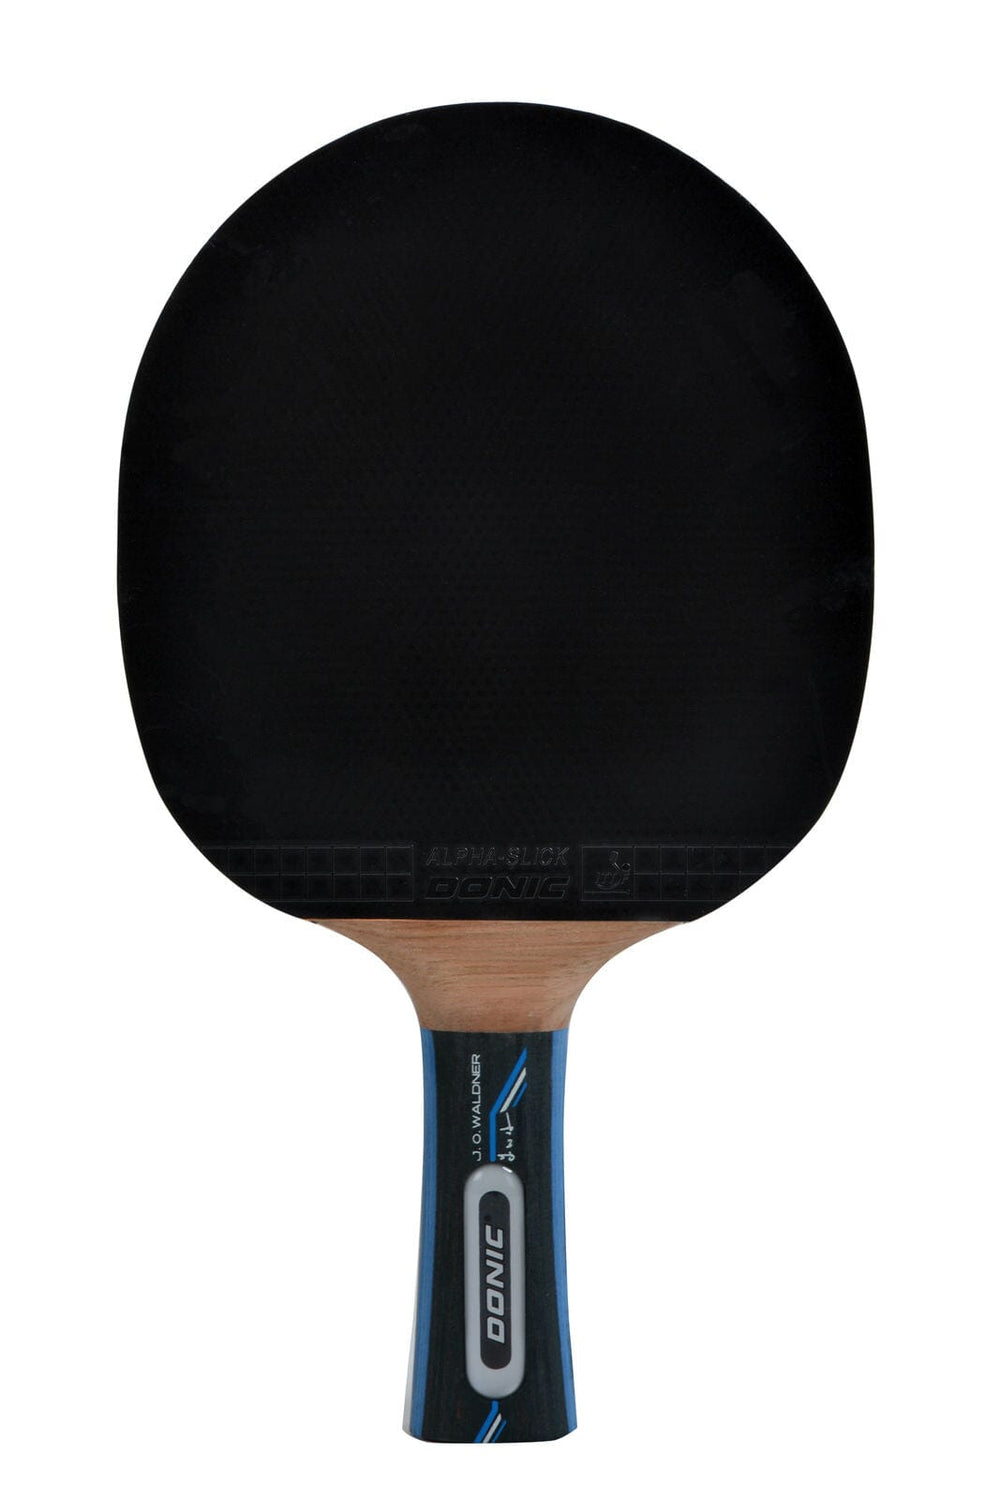 Donic Waldner 900 Table Tennis Paddle Ping-Pong-Racquets Donic 